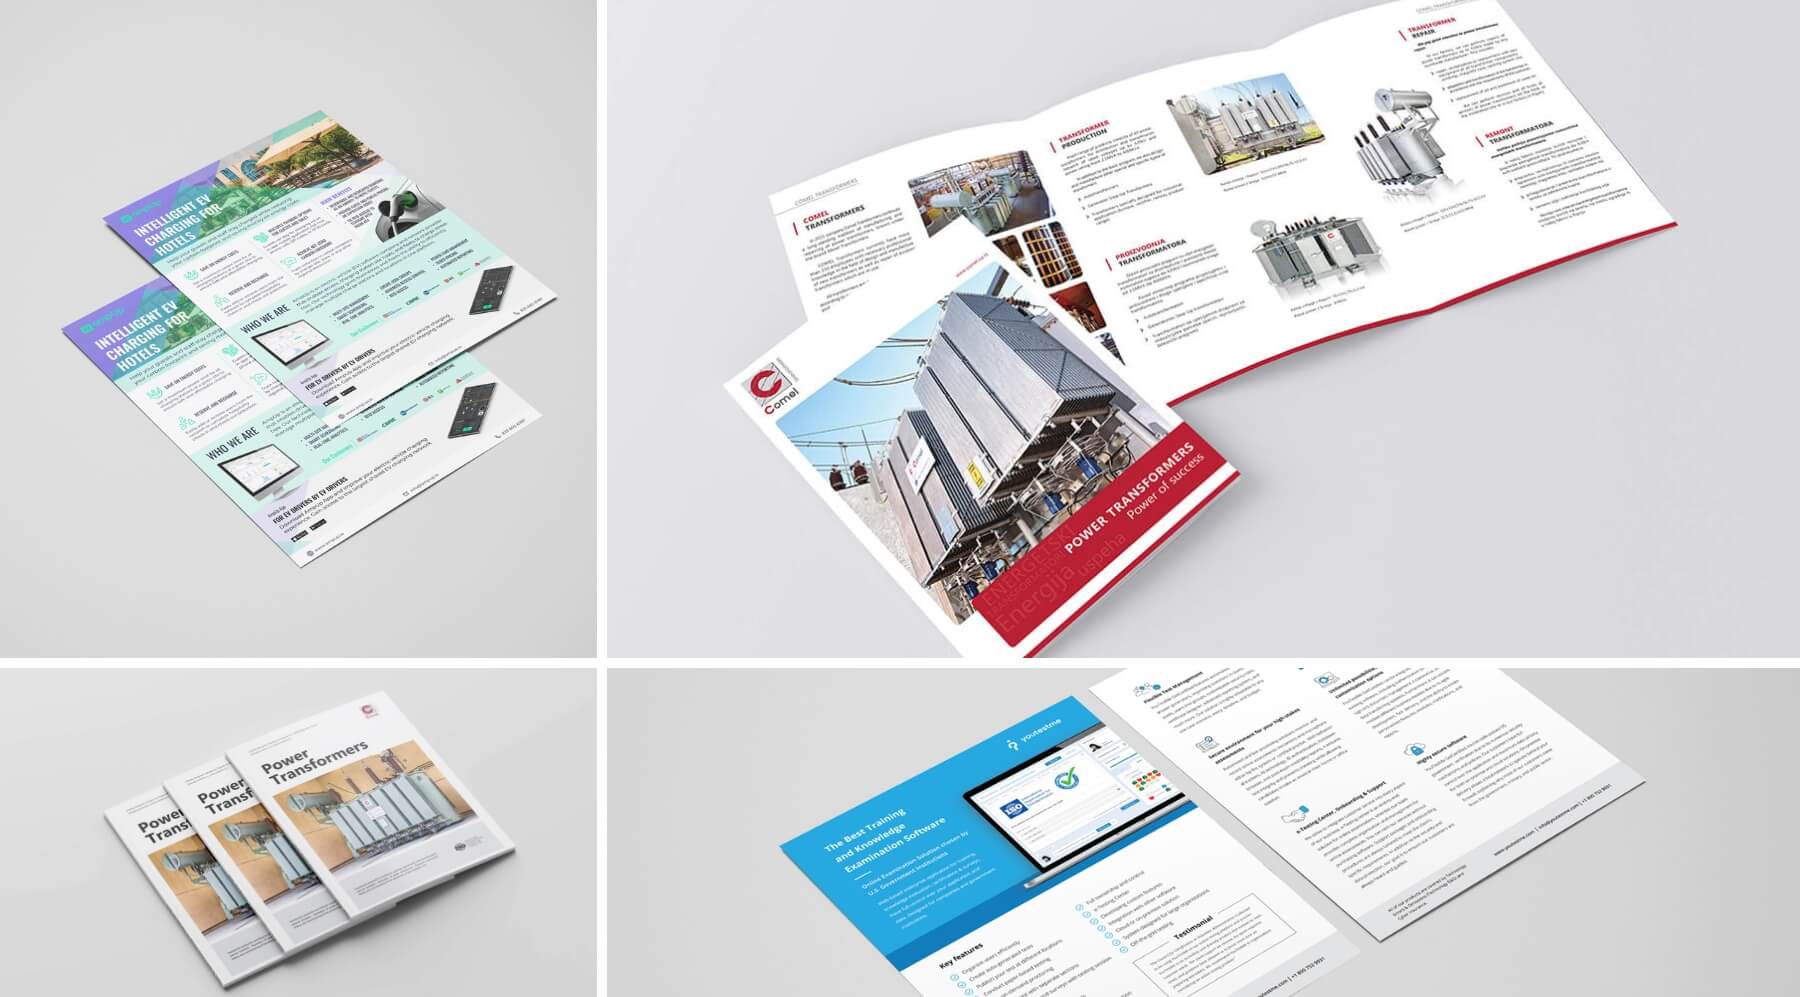 Collection of marketing collateral designed by Nar Agency, including flyers, brochures, catalogs, and one-pagers.